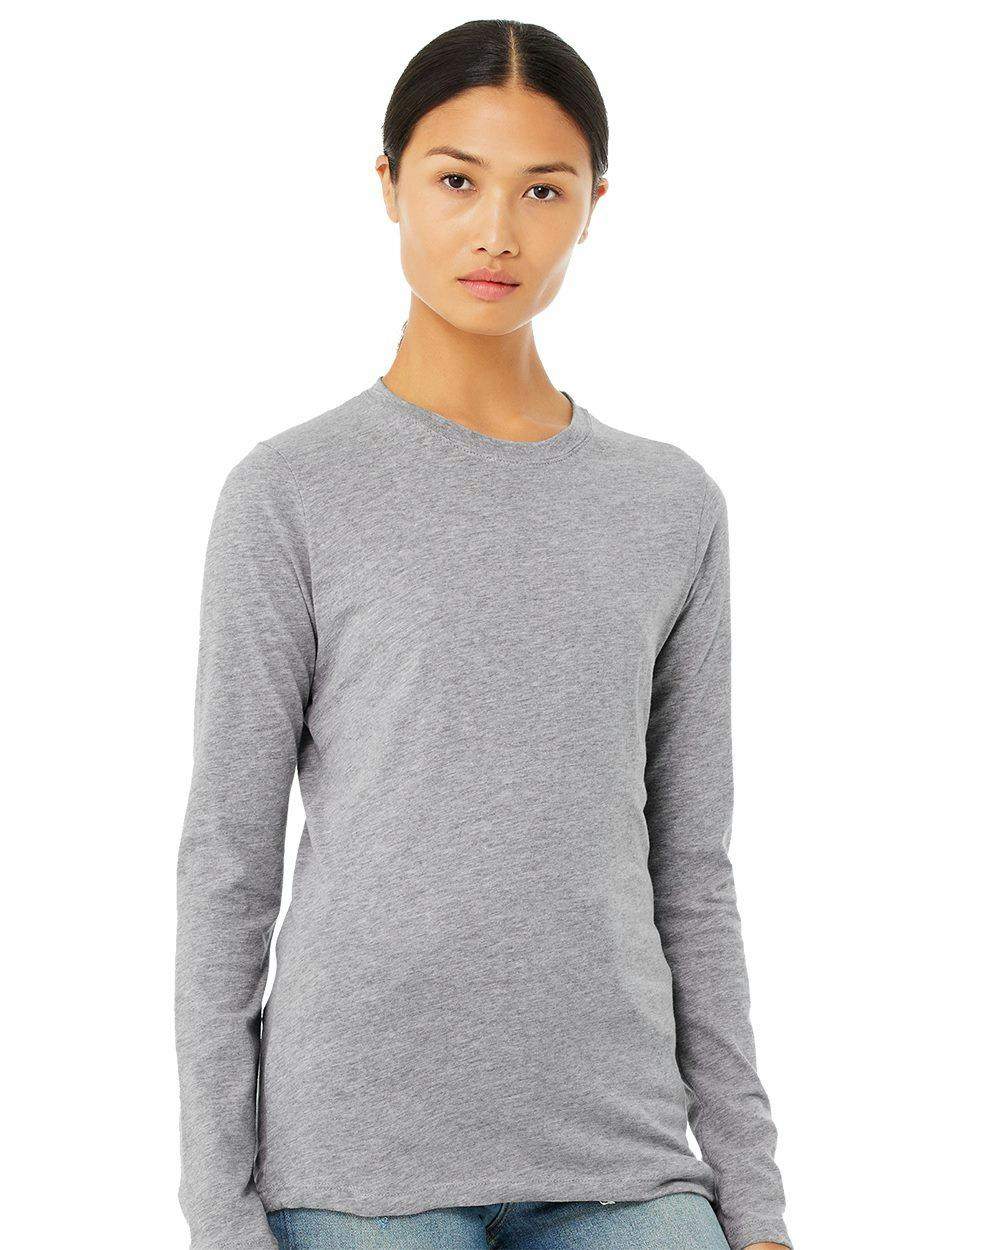 Image for Women’s Jersey Long Sleeve Tee - 6500